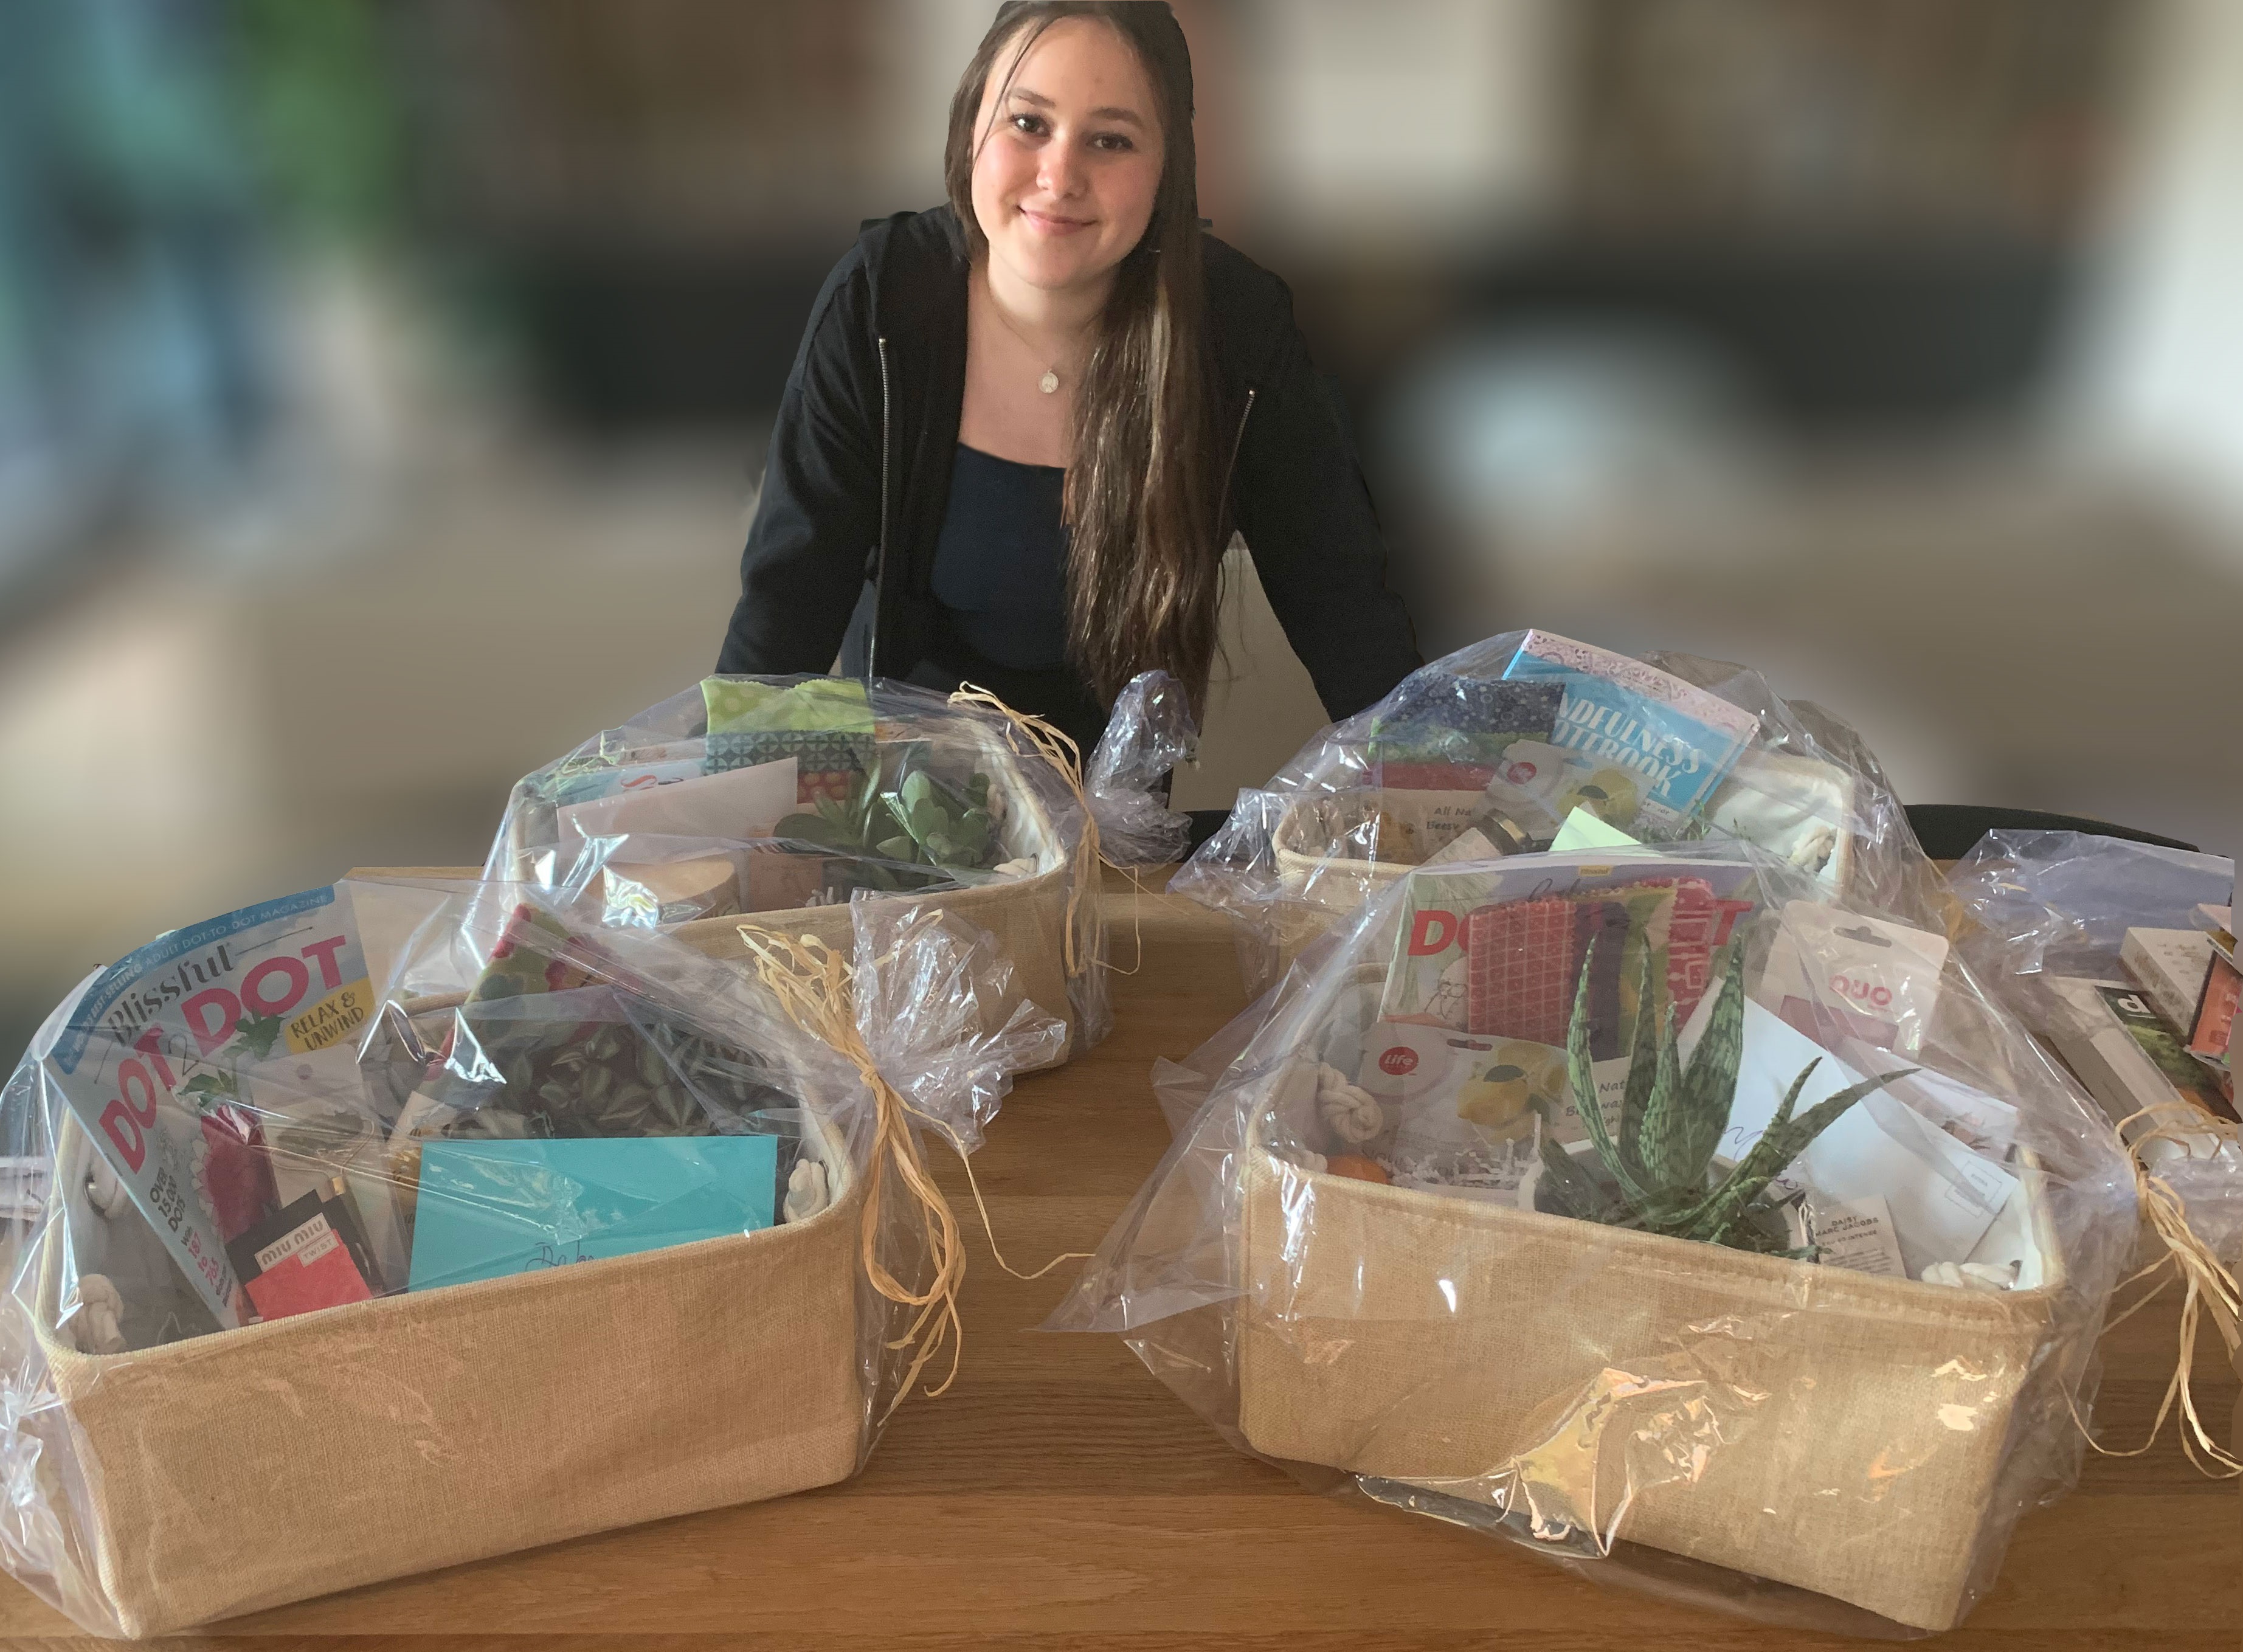 A young woman stands behind a table that is holding gift baskets wrapped in clear cellophane. The baskets contain items such as magazines, and small house plants. The woman is standing leaning on the table, facing the camera and smiling. The background is blurred.